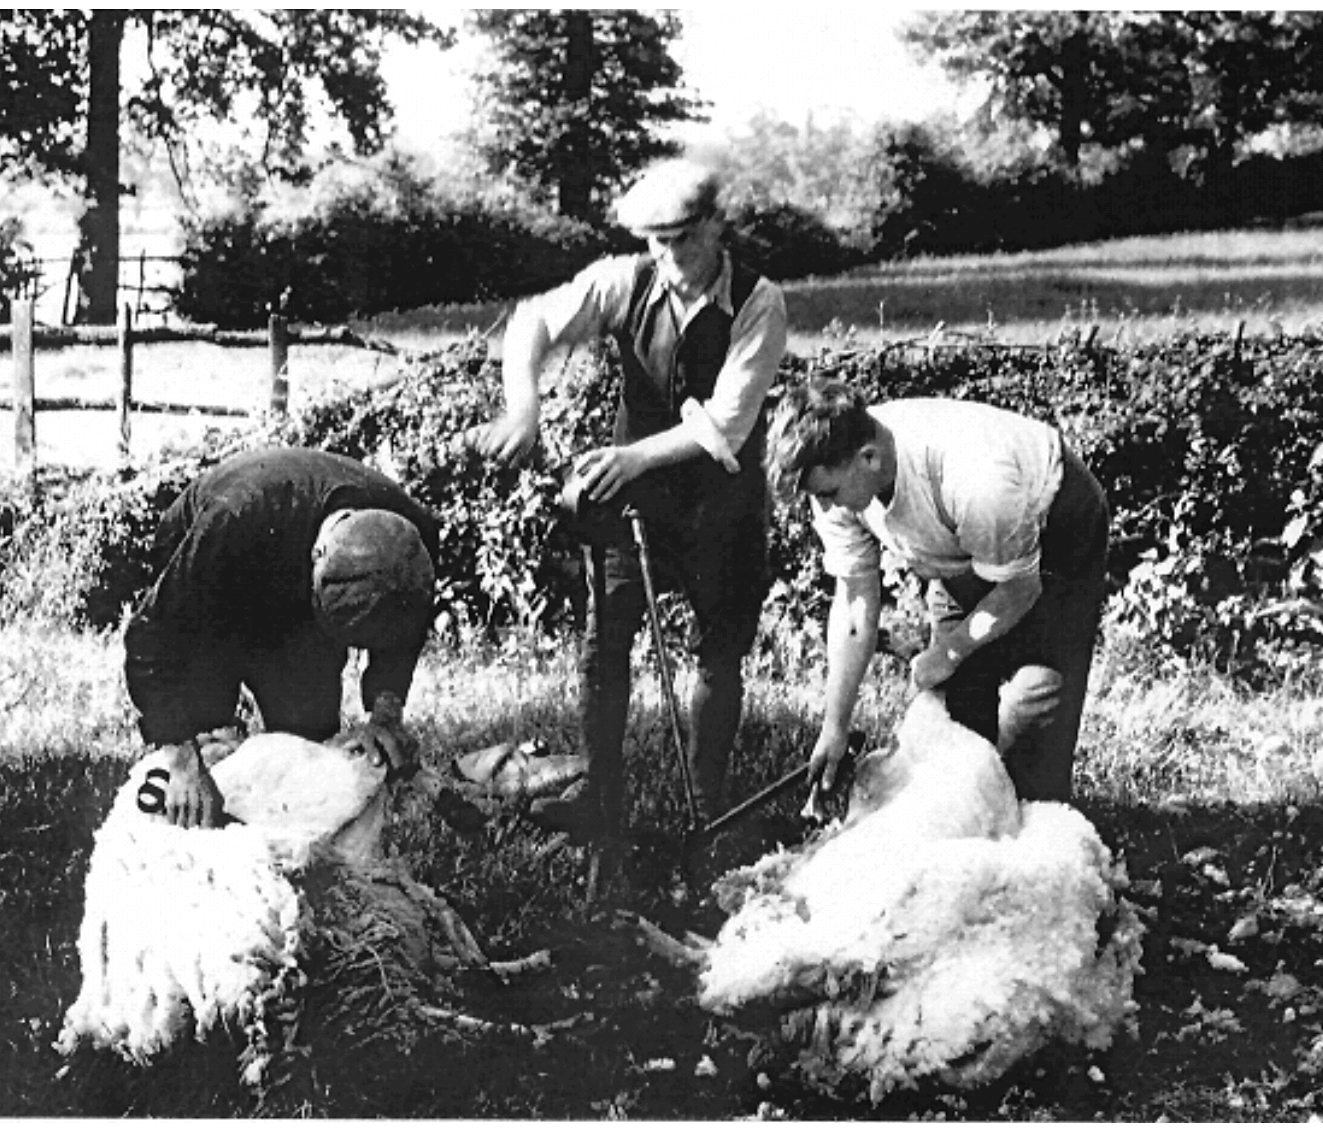 Shearing in the 1930s. Mechanical clippers are now replacing hand shears — Courtesy of H. Spencer